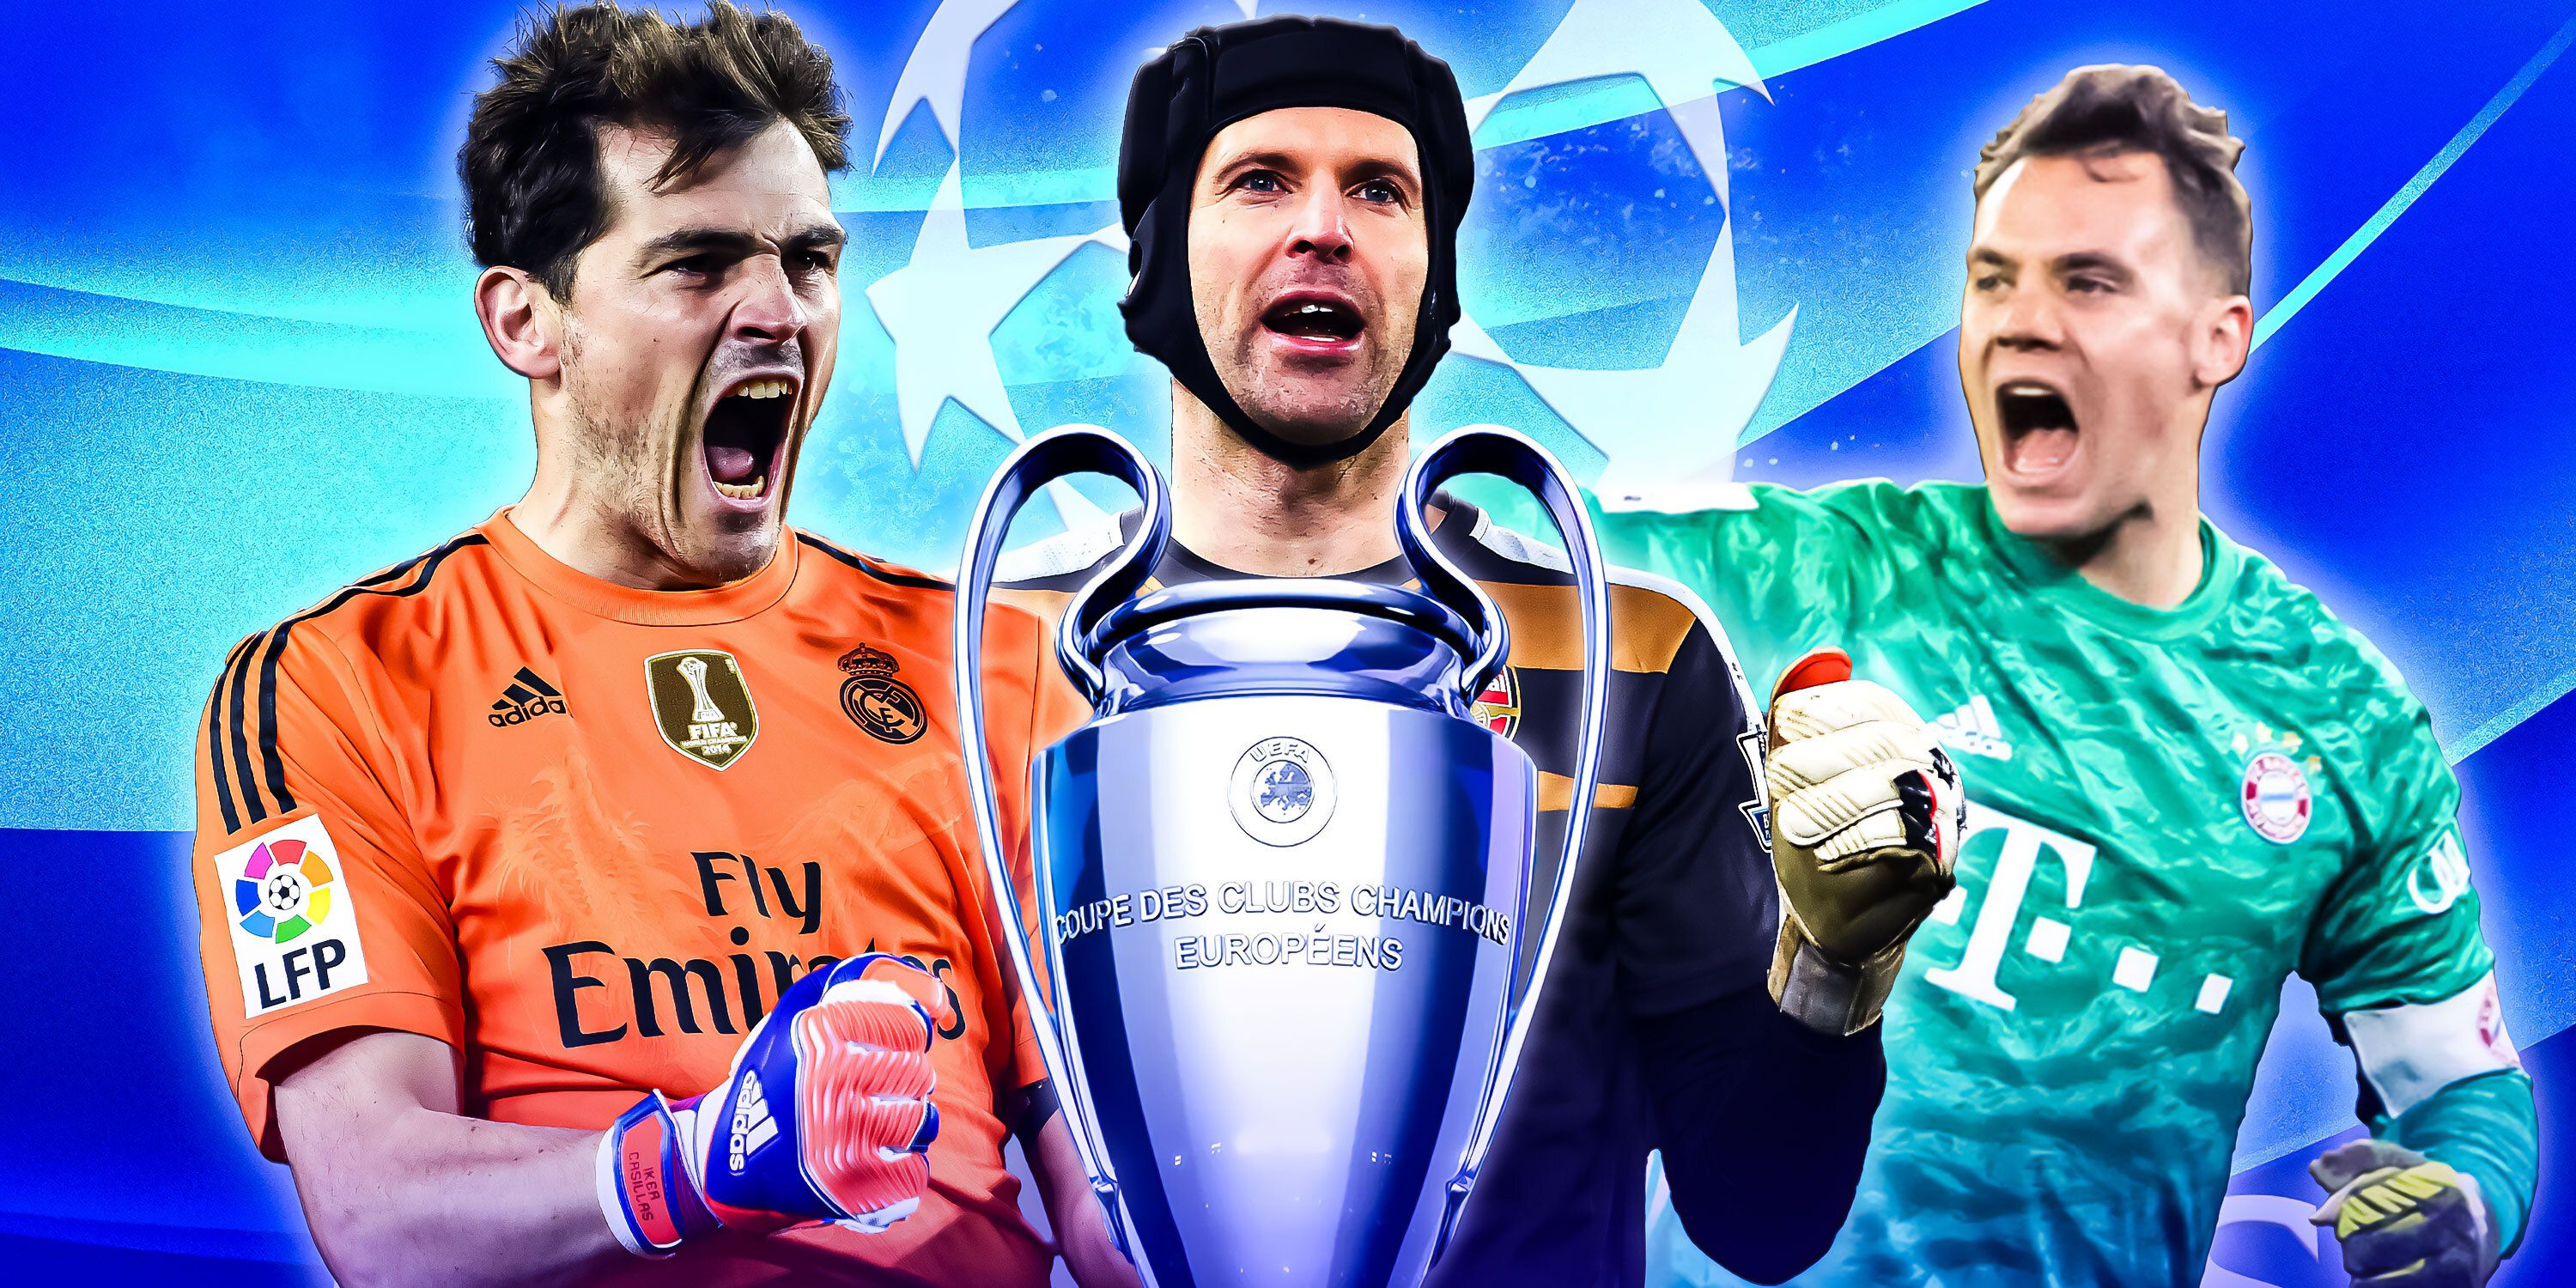 Manuel Neuer at Bayern Munich, Iker Casillas at Real Madrid and Petr Cech at Chelsea